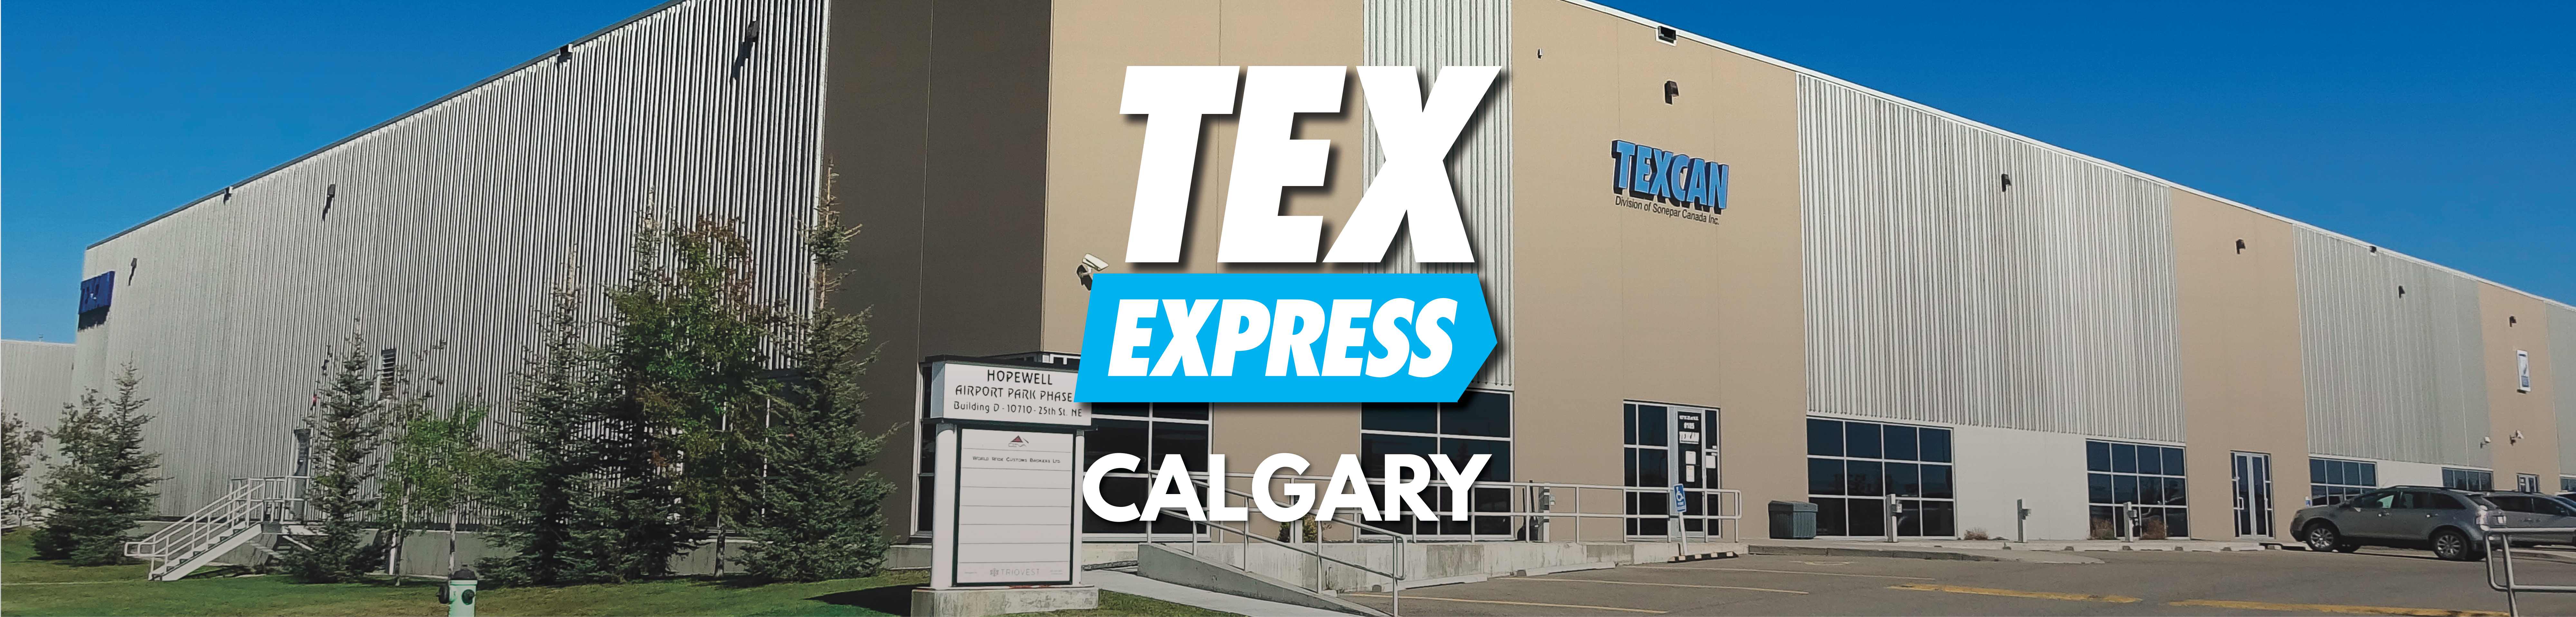 Texcan Calgary Branch  -  TexExpress